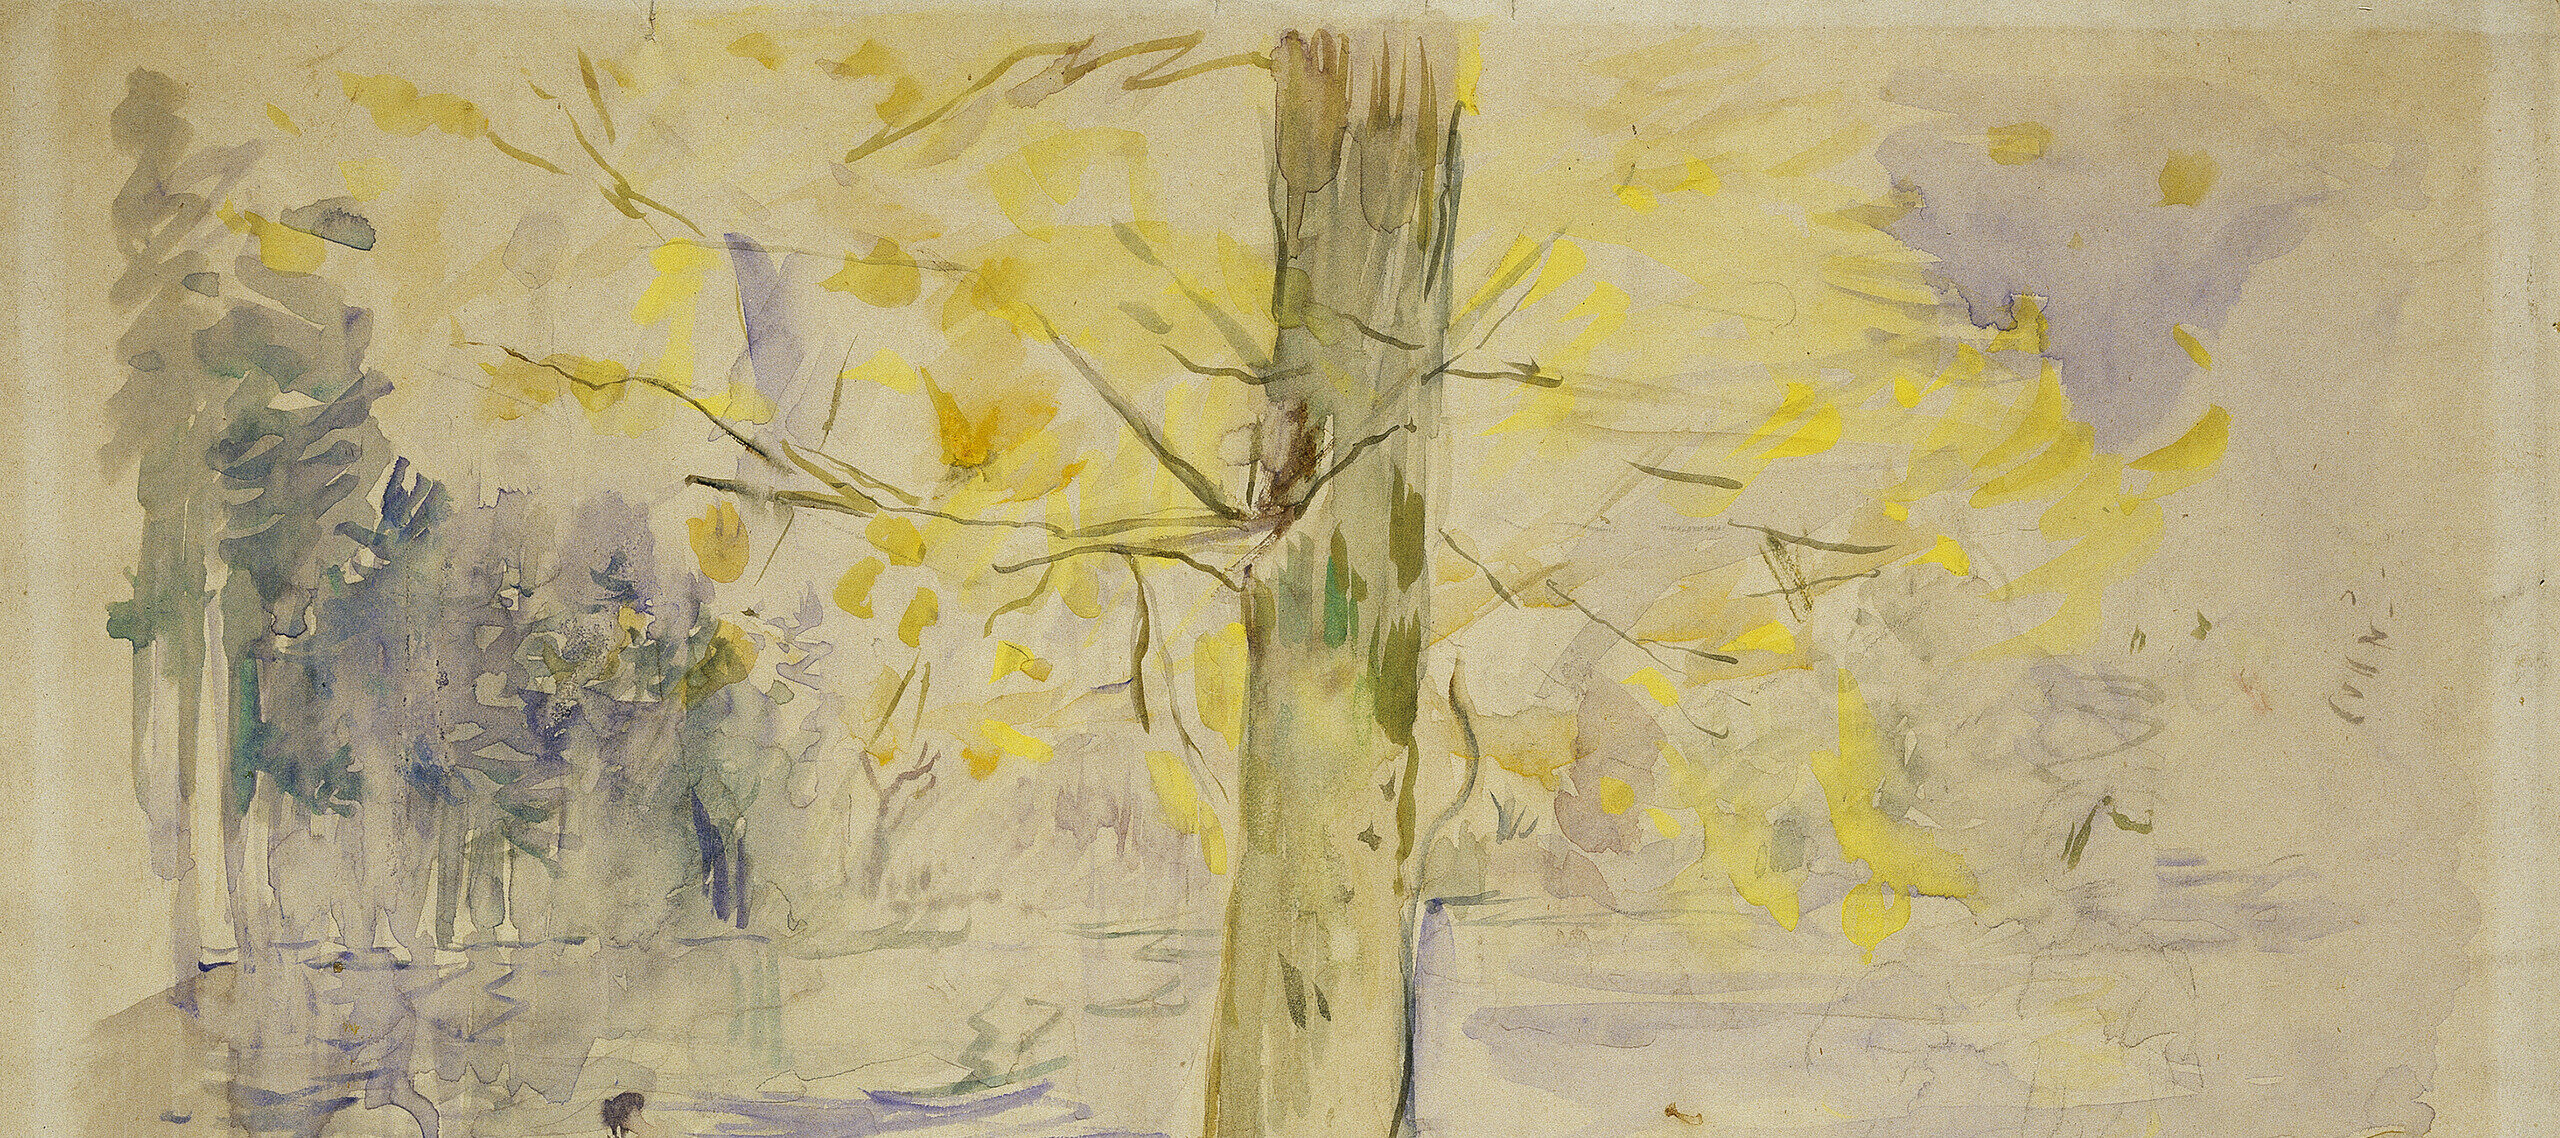 A tree with bright, yellow leaves is standing next to a river. The lush colors suggest a late summer day. On the river, a person is rowing in a boat. The other side of the river is indicated by a line of trees.